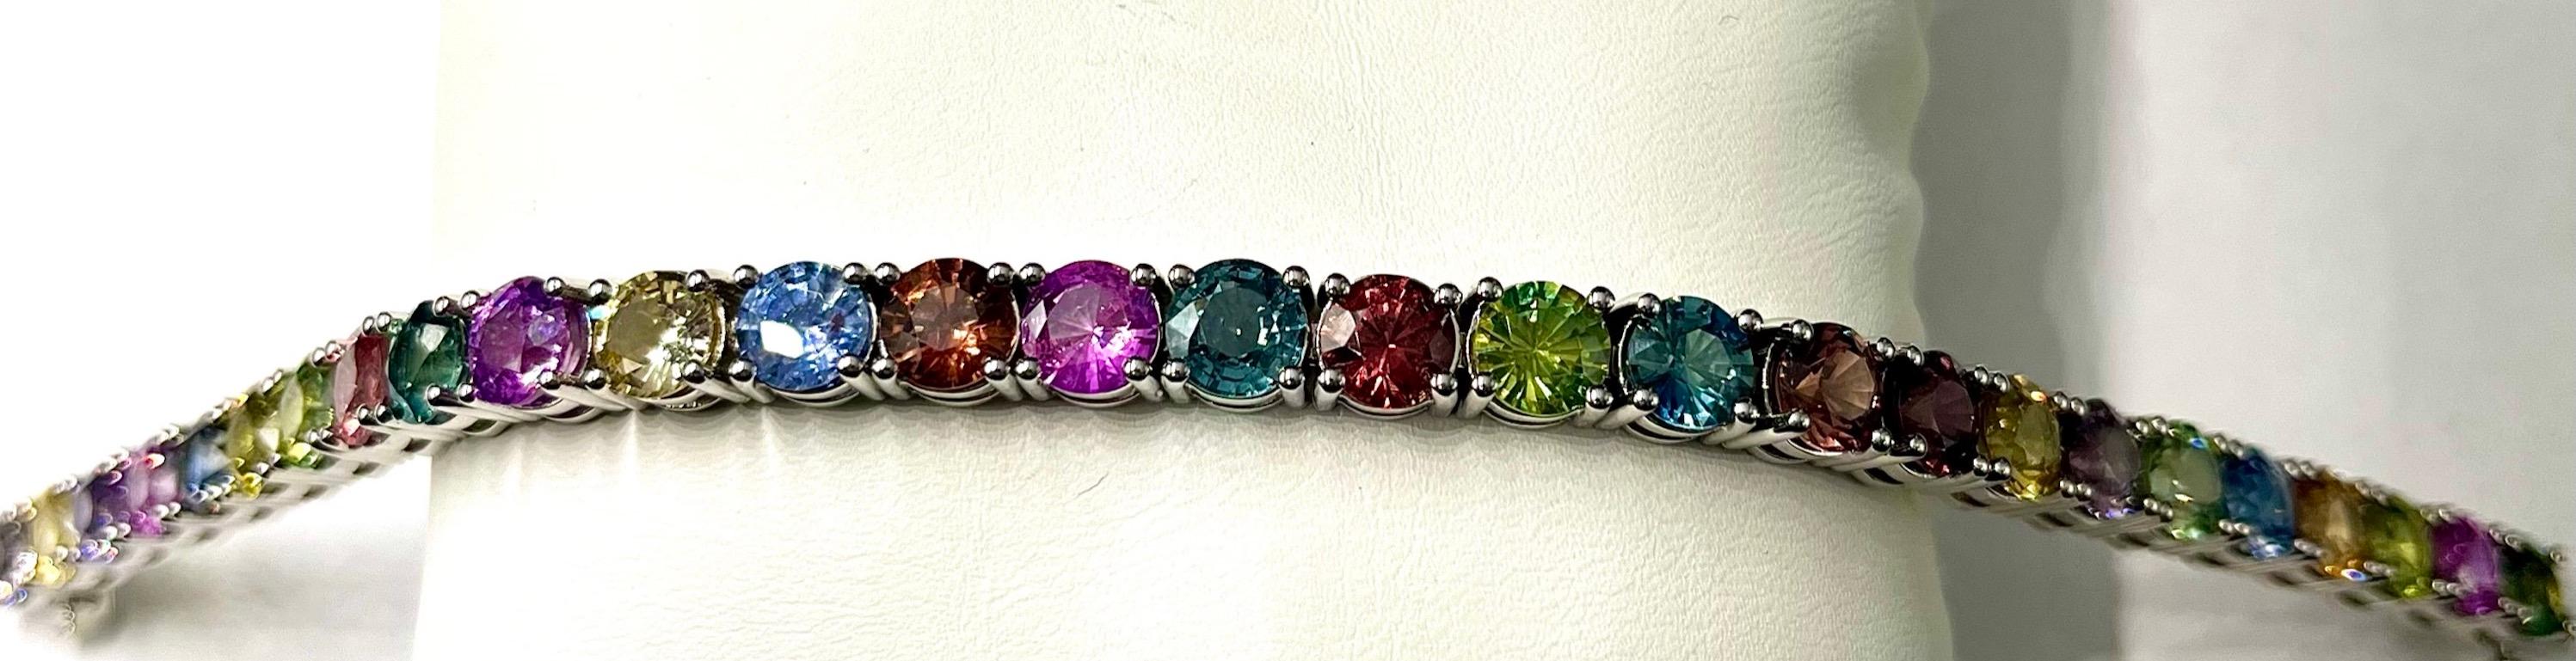 This is an absolutely beautiful bracelet with a rainbow array of colors of Natural Round Sapphires. These sapphires are very clean and the colors are vibrant, rich and highly brilliant. This color combination offers a great variety of colors. This